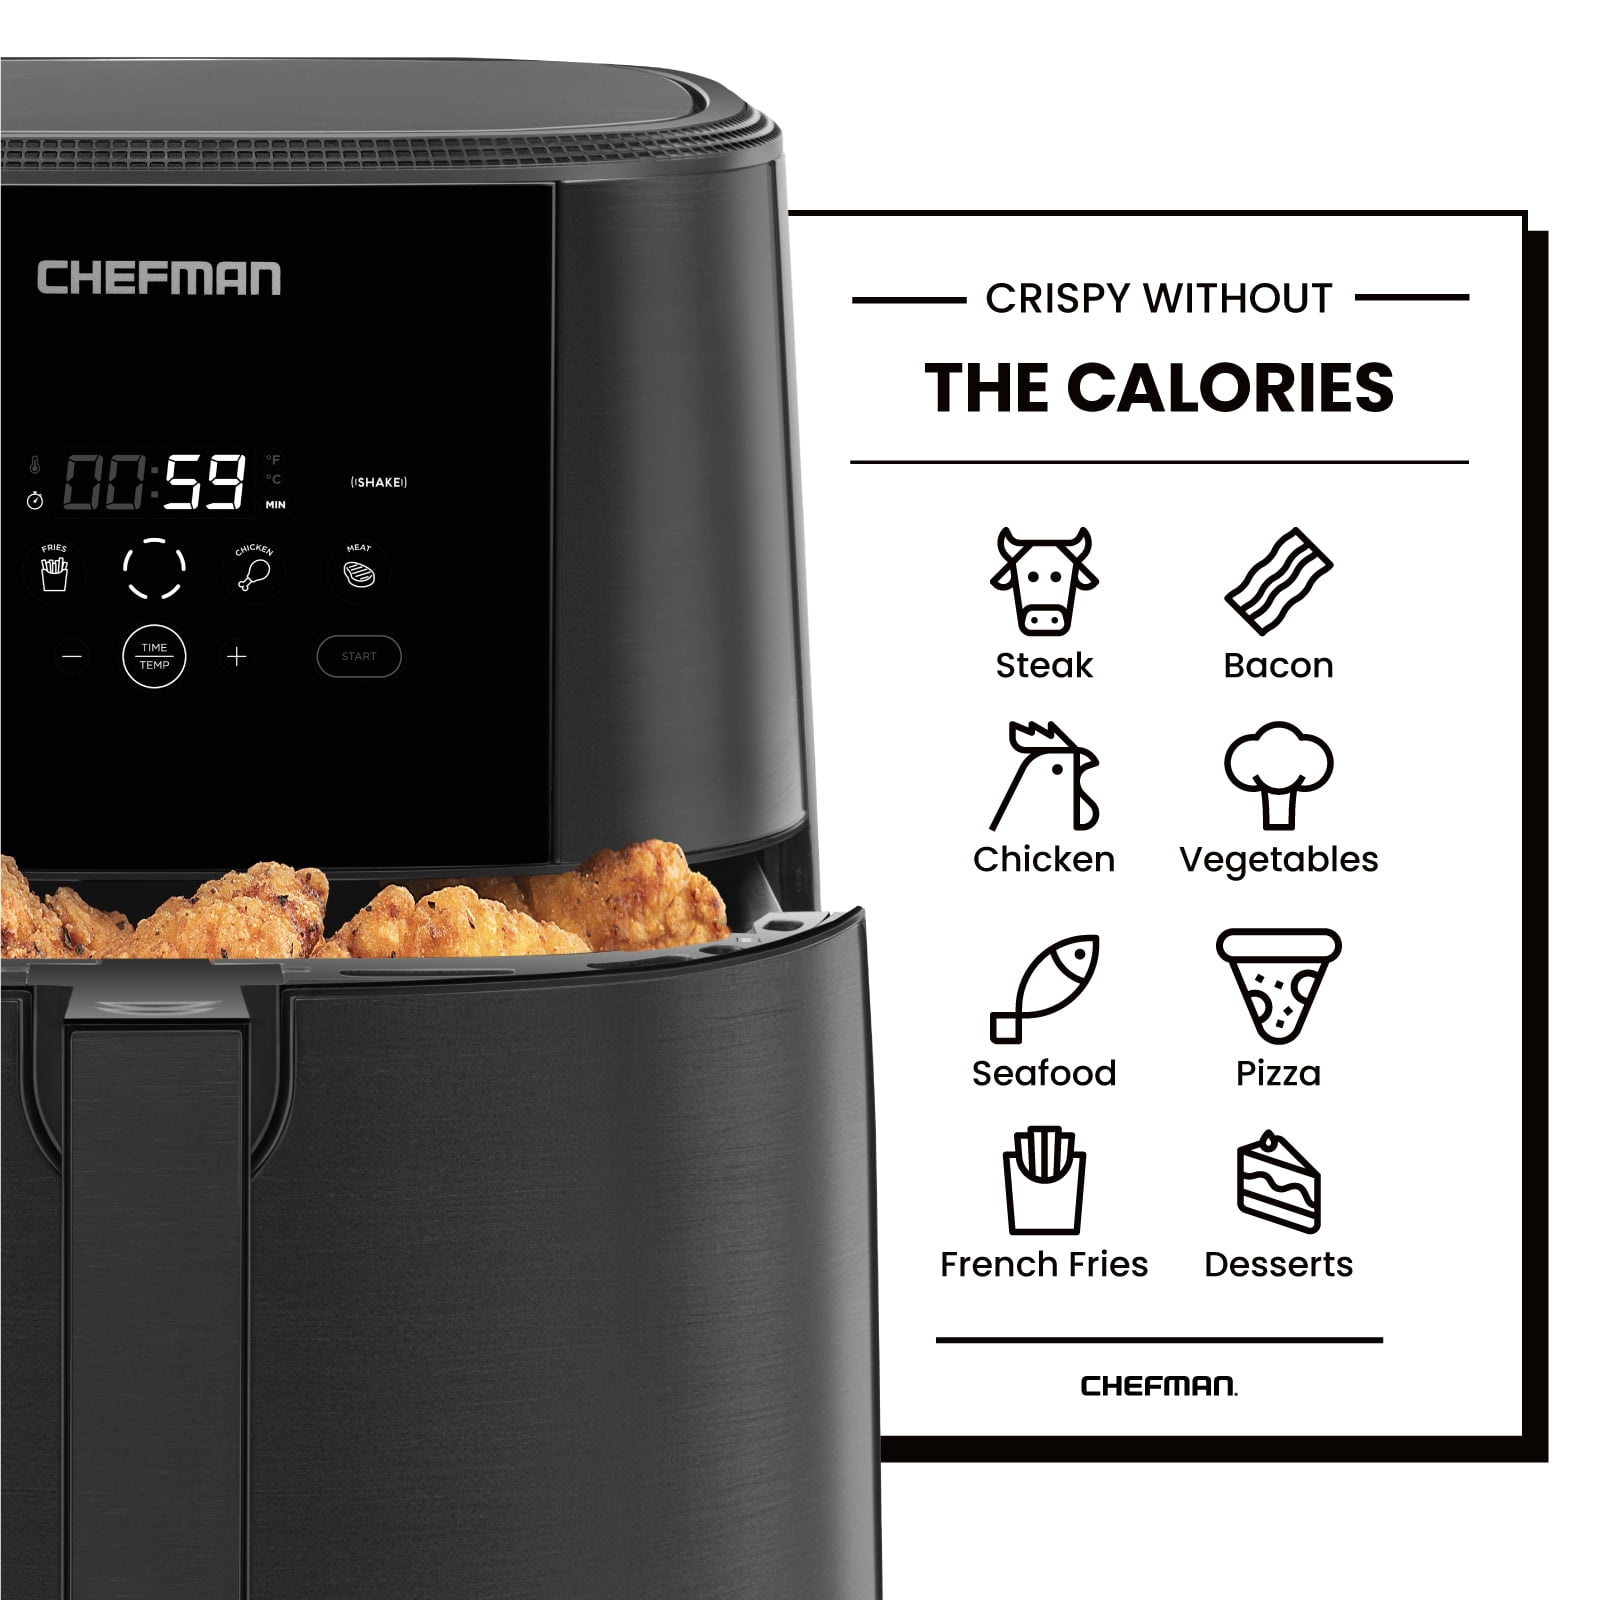 Family size air fryer on clearance – A Thrifty Mom